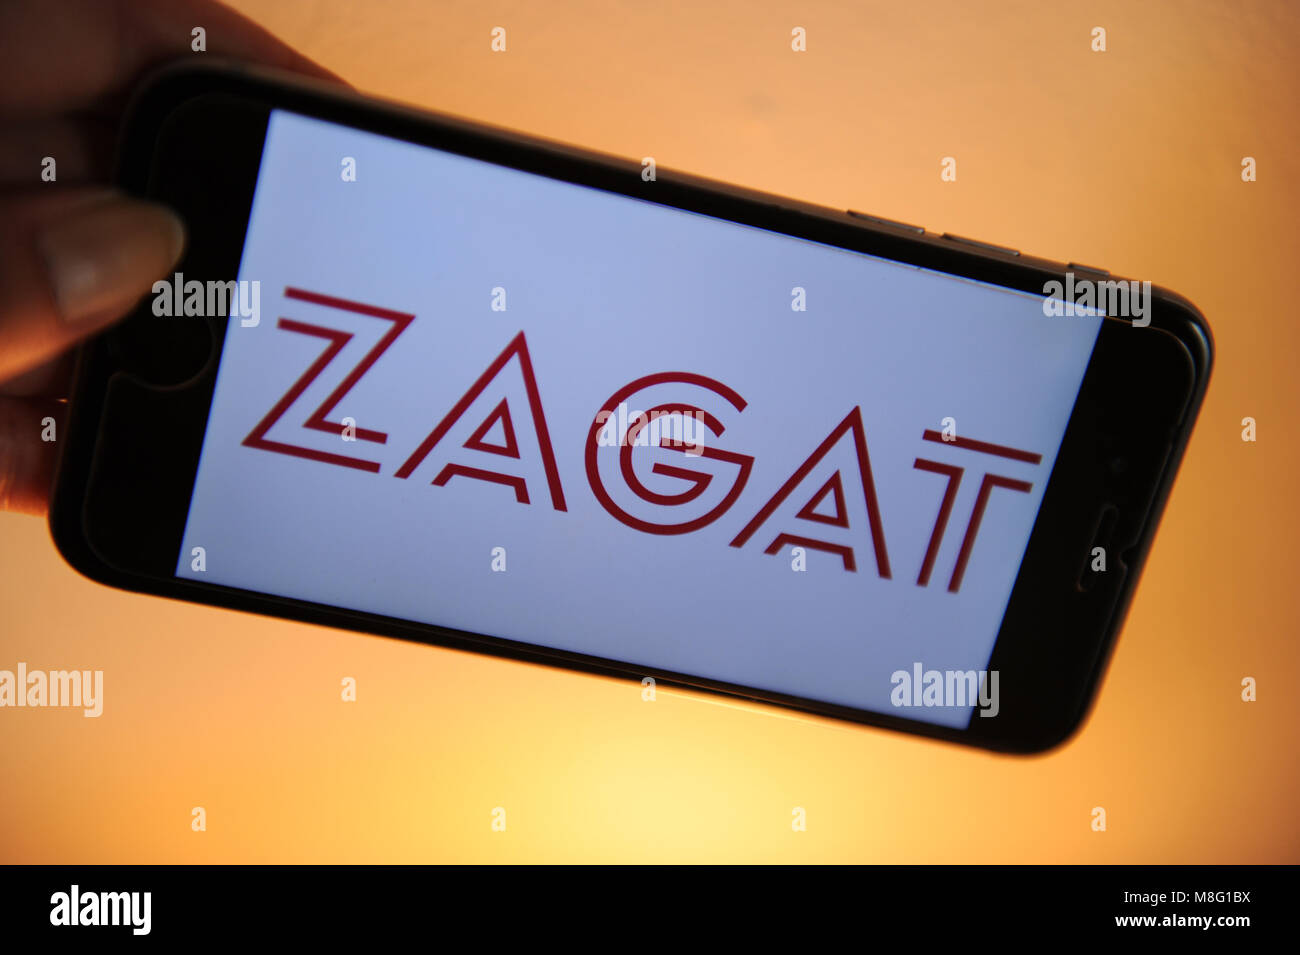 Zagat the food guide website Stock Photo